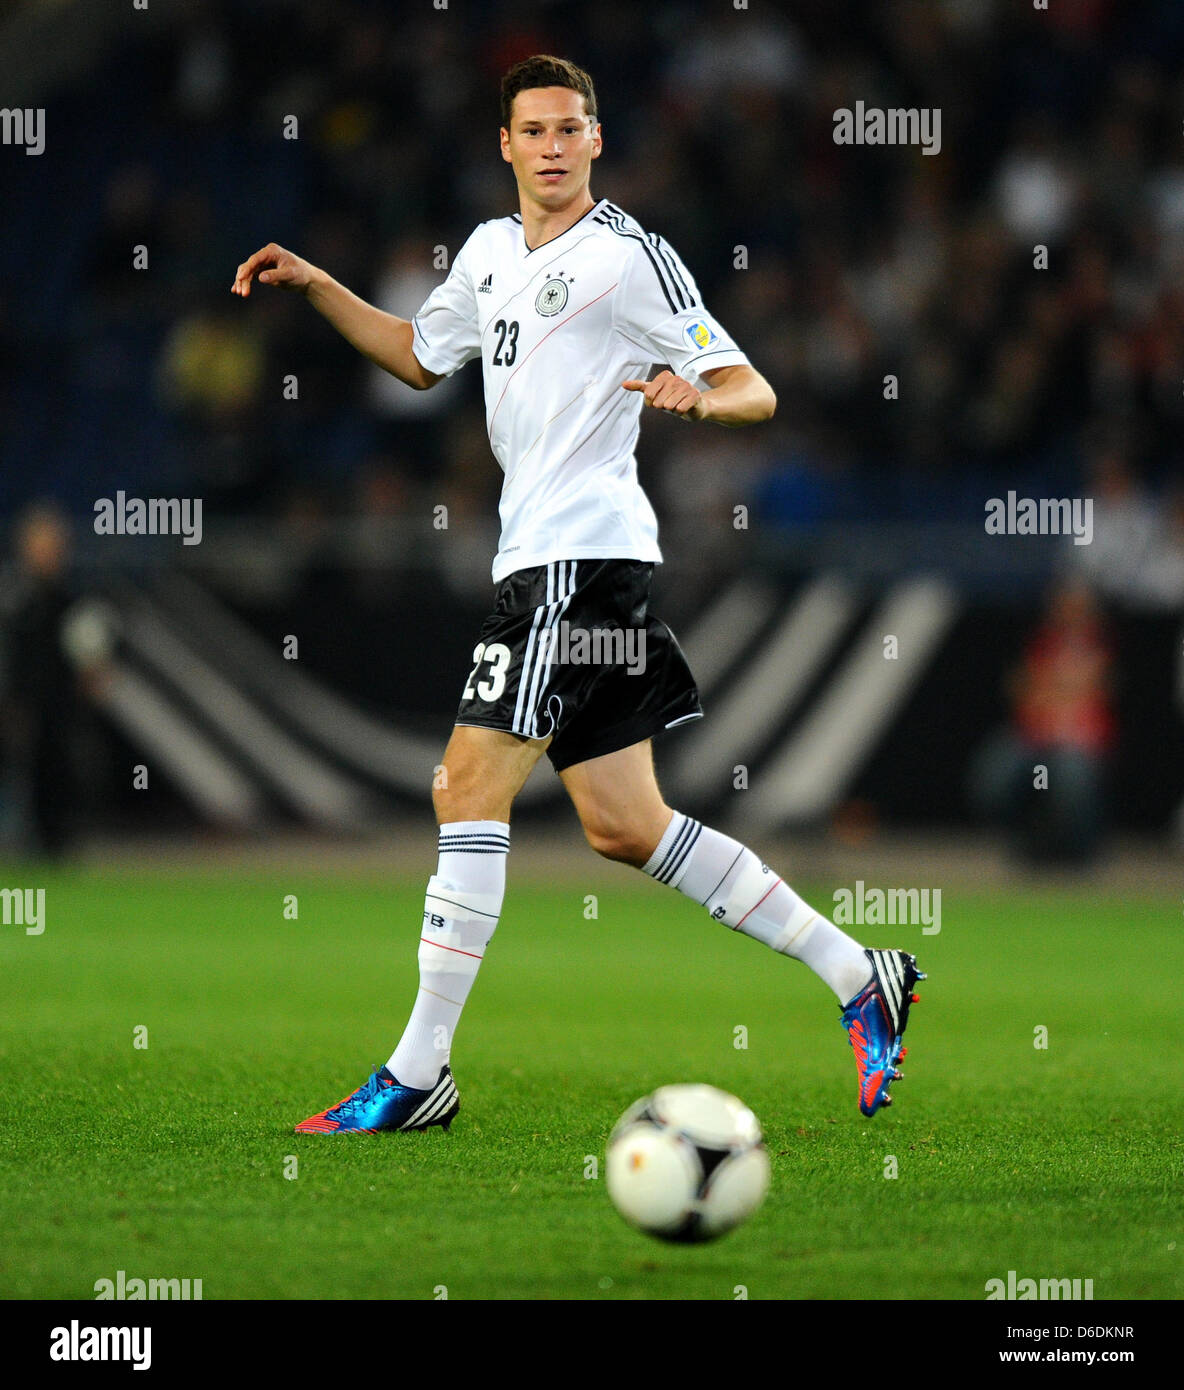 Germany's Julian Draxler dribbles the ball during the Group C FIFA World Cup 2014 qualifying match Germany vs Faroe Islands at AWD Arena in Hanover, Germany, 07 September 2012. Germany won 3:0. Photo: Thomas Eisenhuth Stock Photo